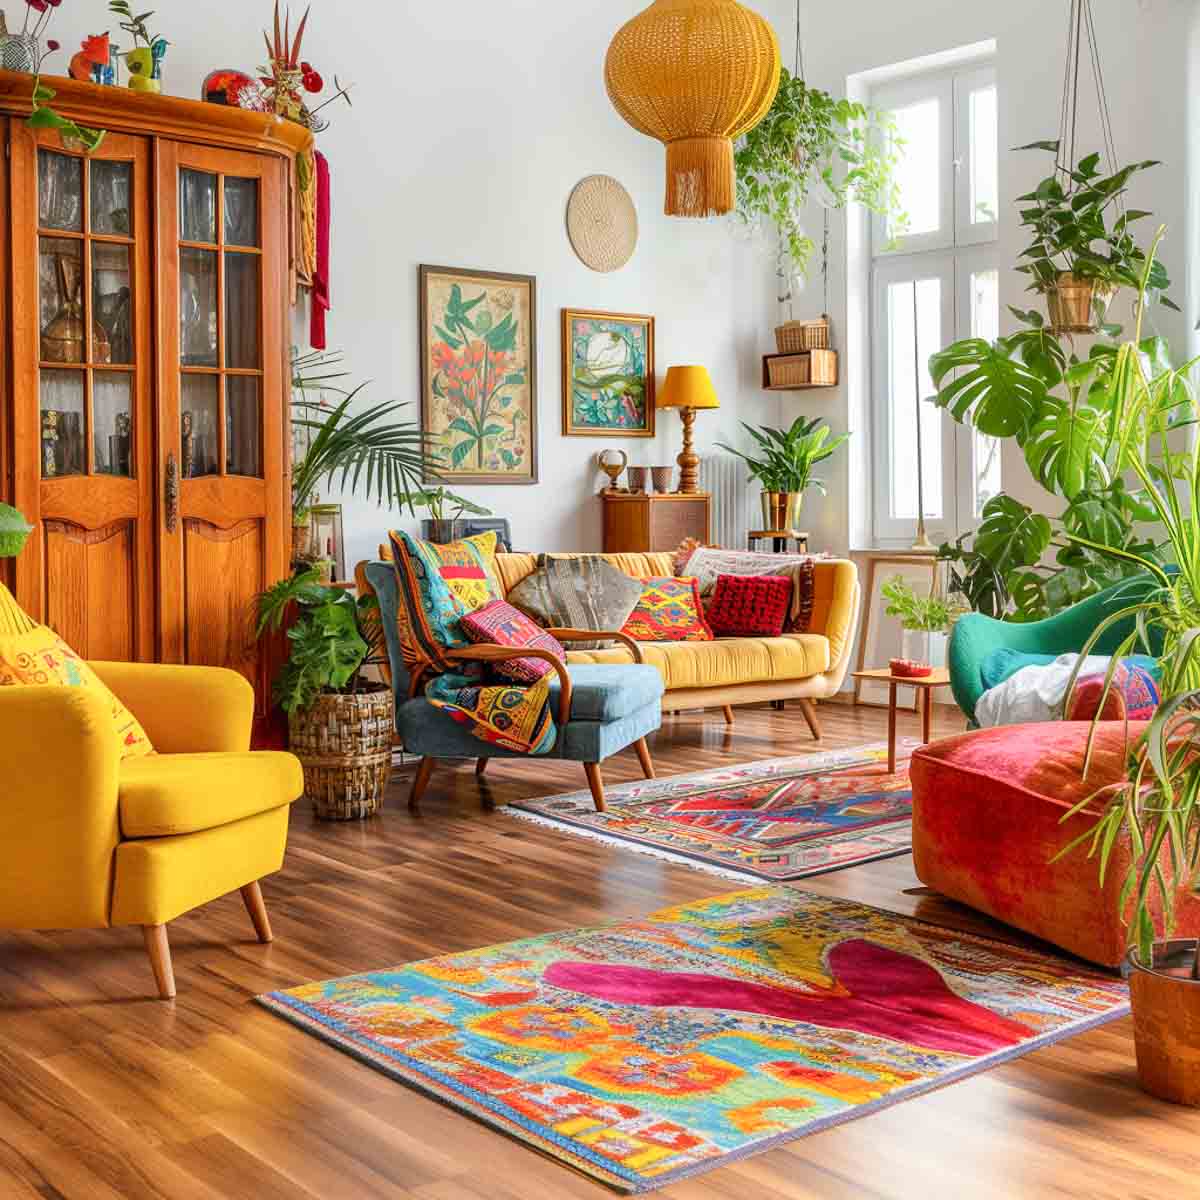 a boho decorating style living room filled with colorful rugs, furnishings and accessories